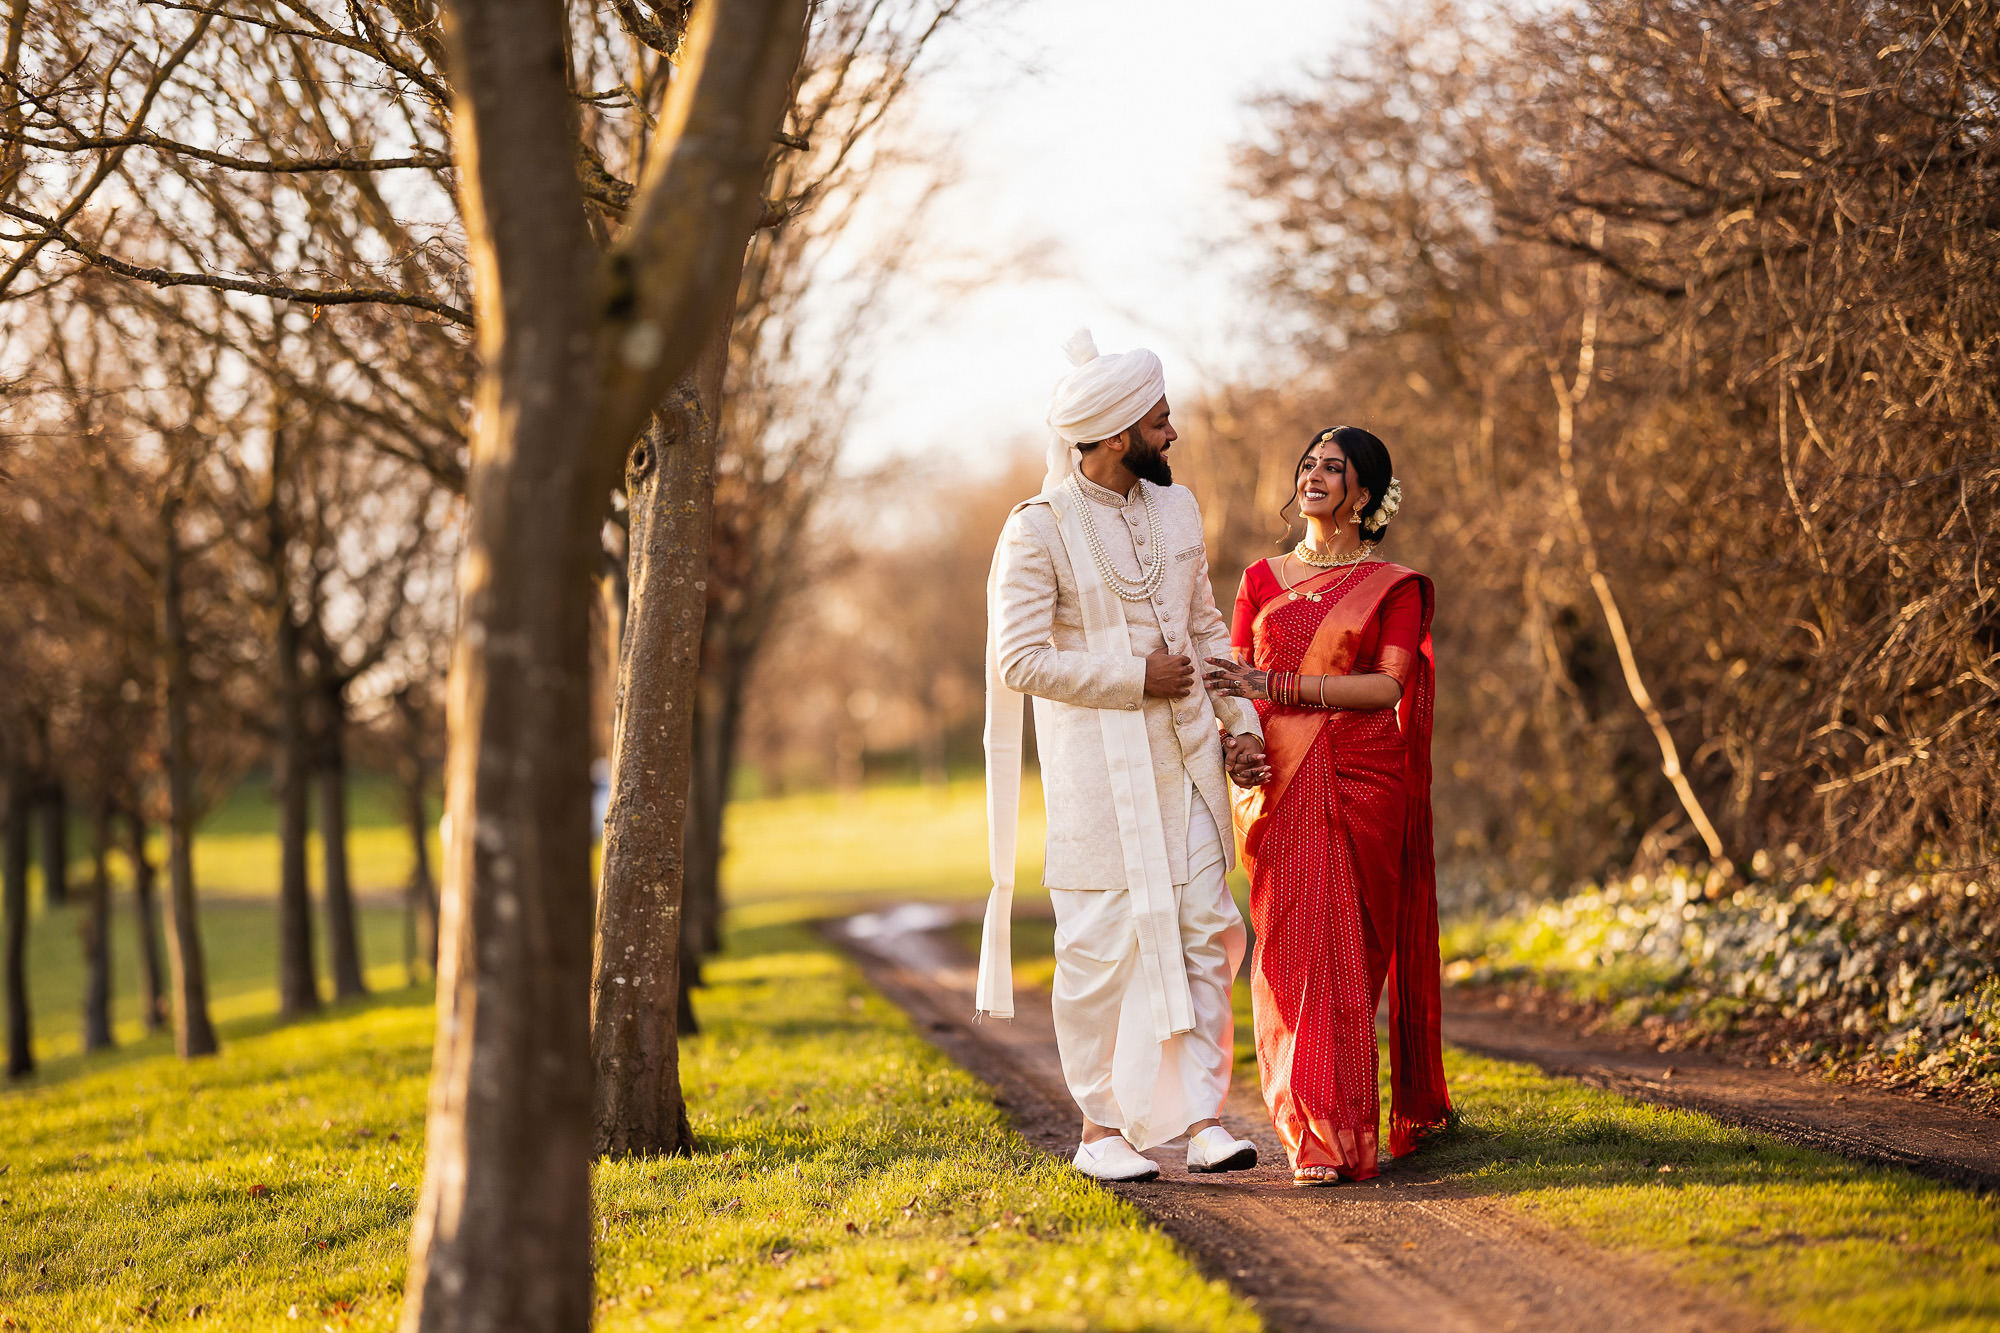 Tamil Wedding, Tamil Wedding Photographer, Stockley Park, Stockley Marquee, Couples portraits, golden hour